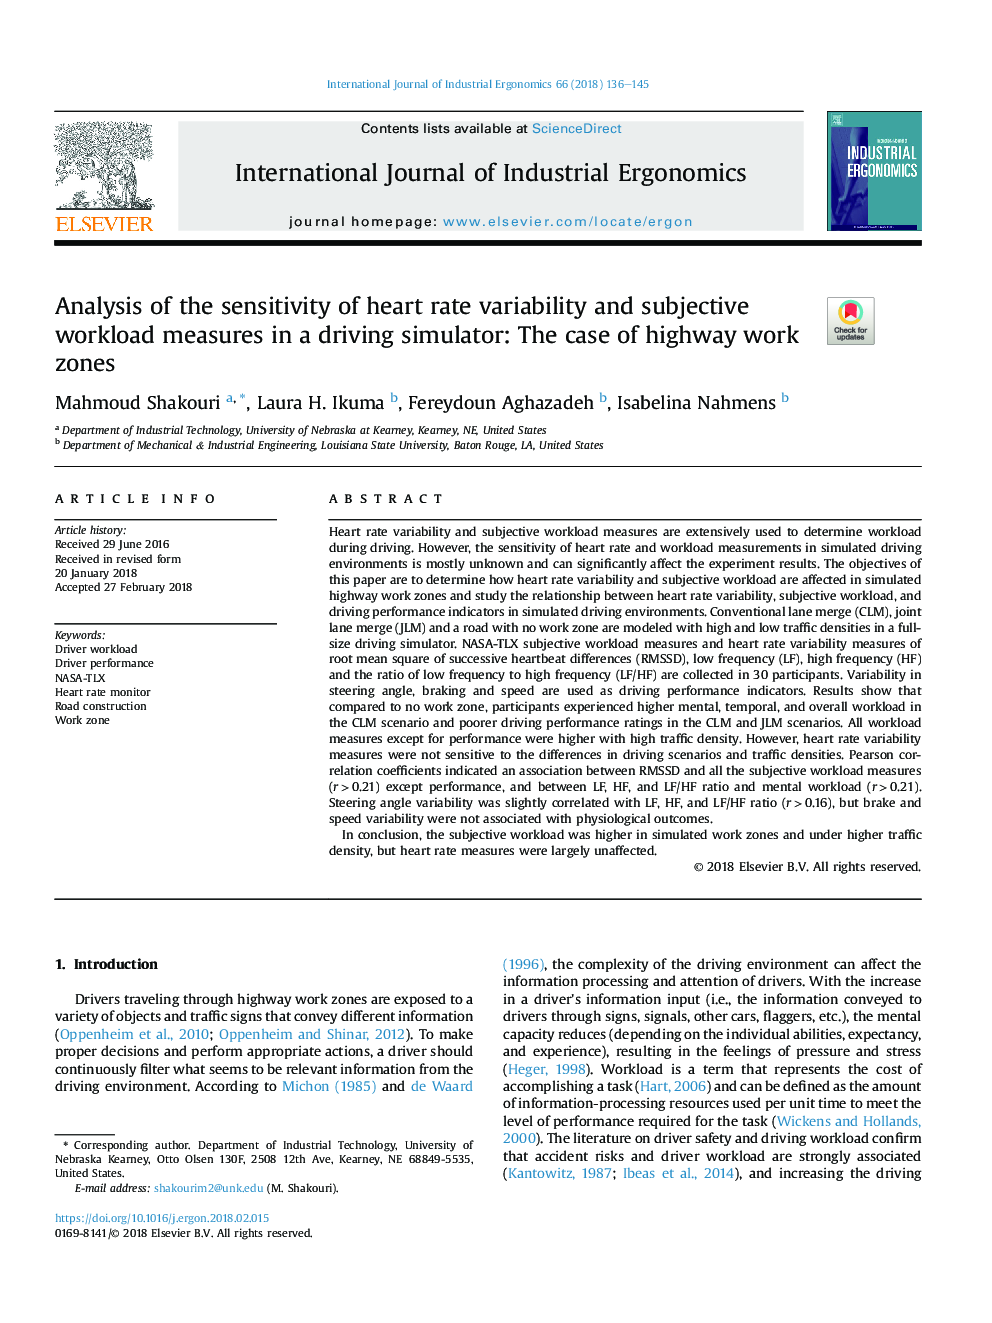 Analysis of the sensitivity of heart rate variability and subjective workload measures in a driving simulator: The case of highway work zones